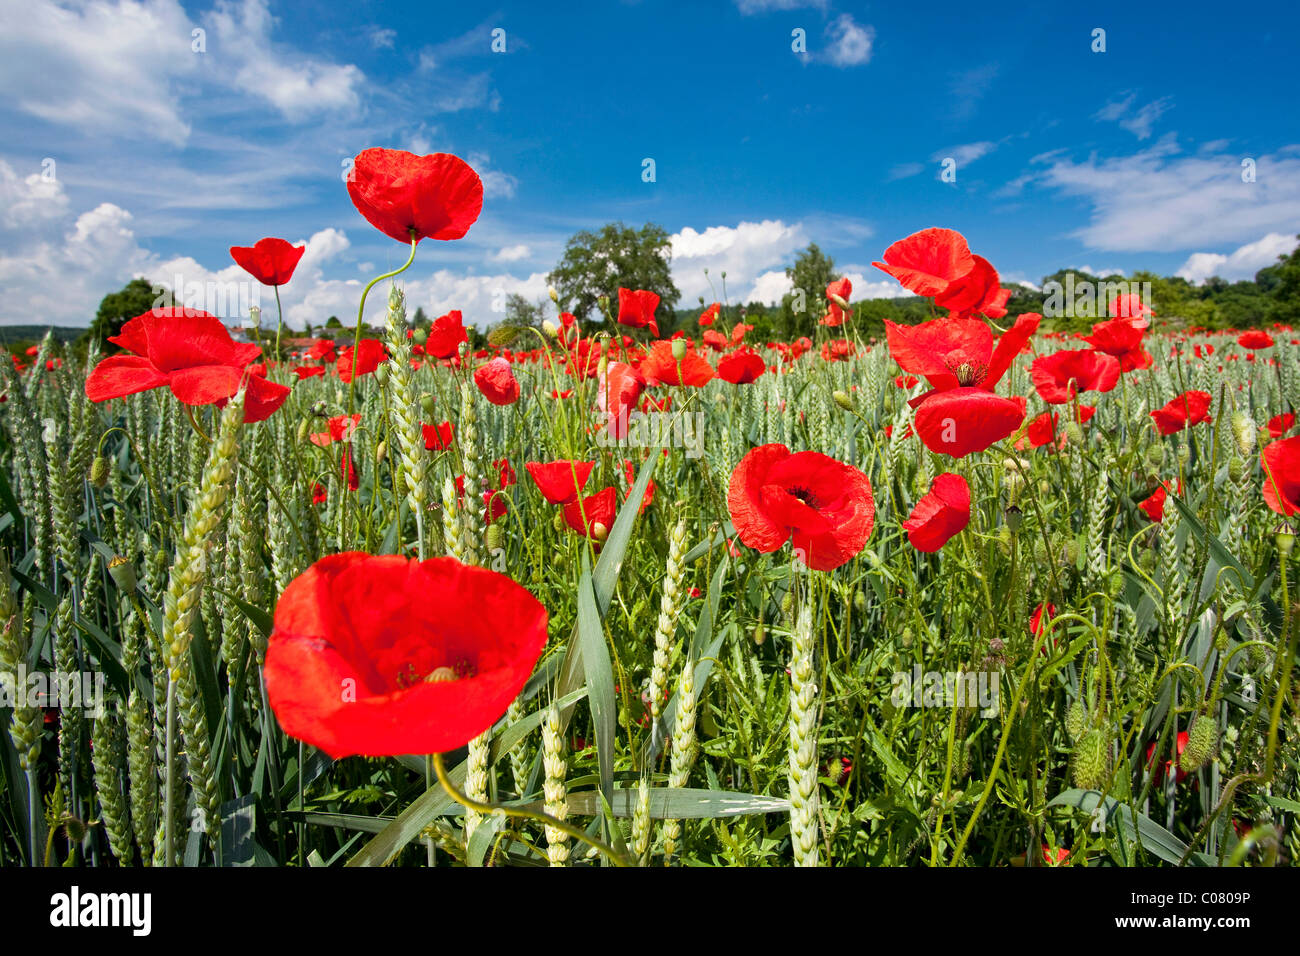 Poppies (Papaver) growing on a field in summer, Lake Constance district, Baden-Wuerttemberg, Germany, Europe Stock Photo